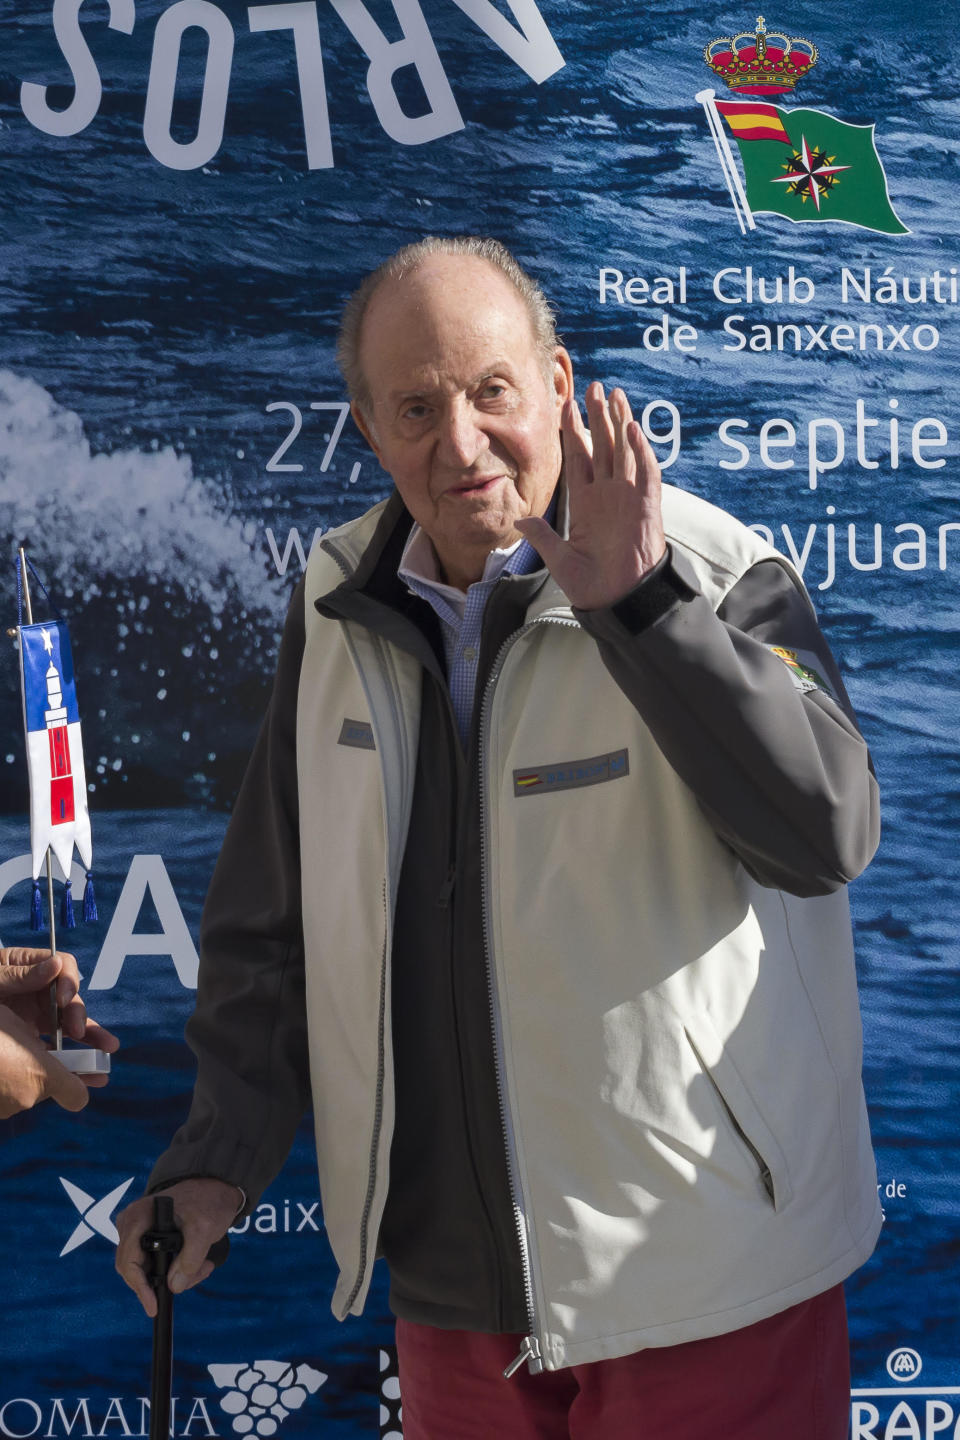 King Juan Carlos I of Spain dressed in a vest and jumper holding a walking stick at a sailing club in Spain